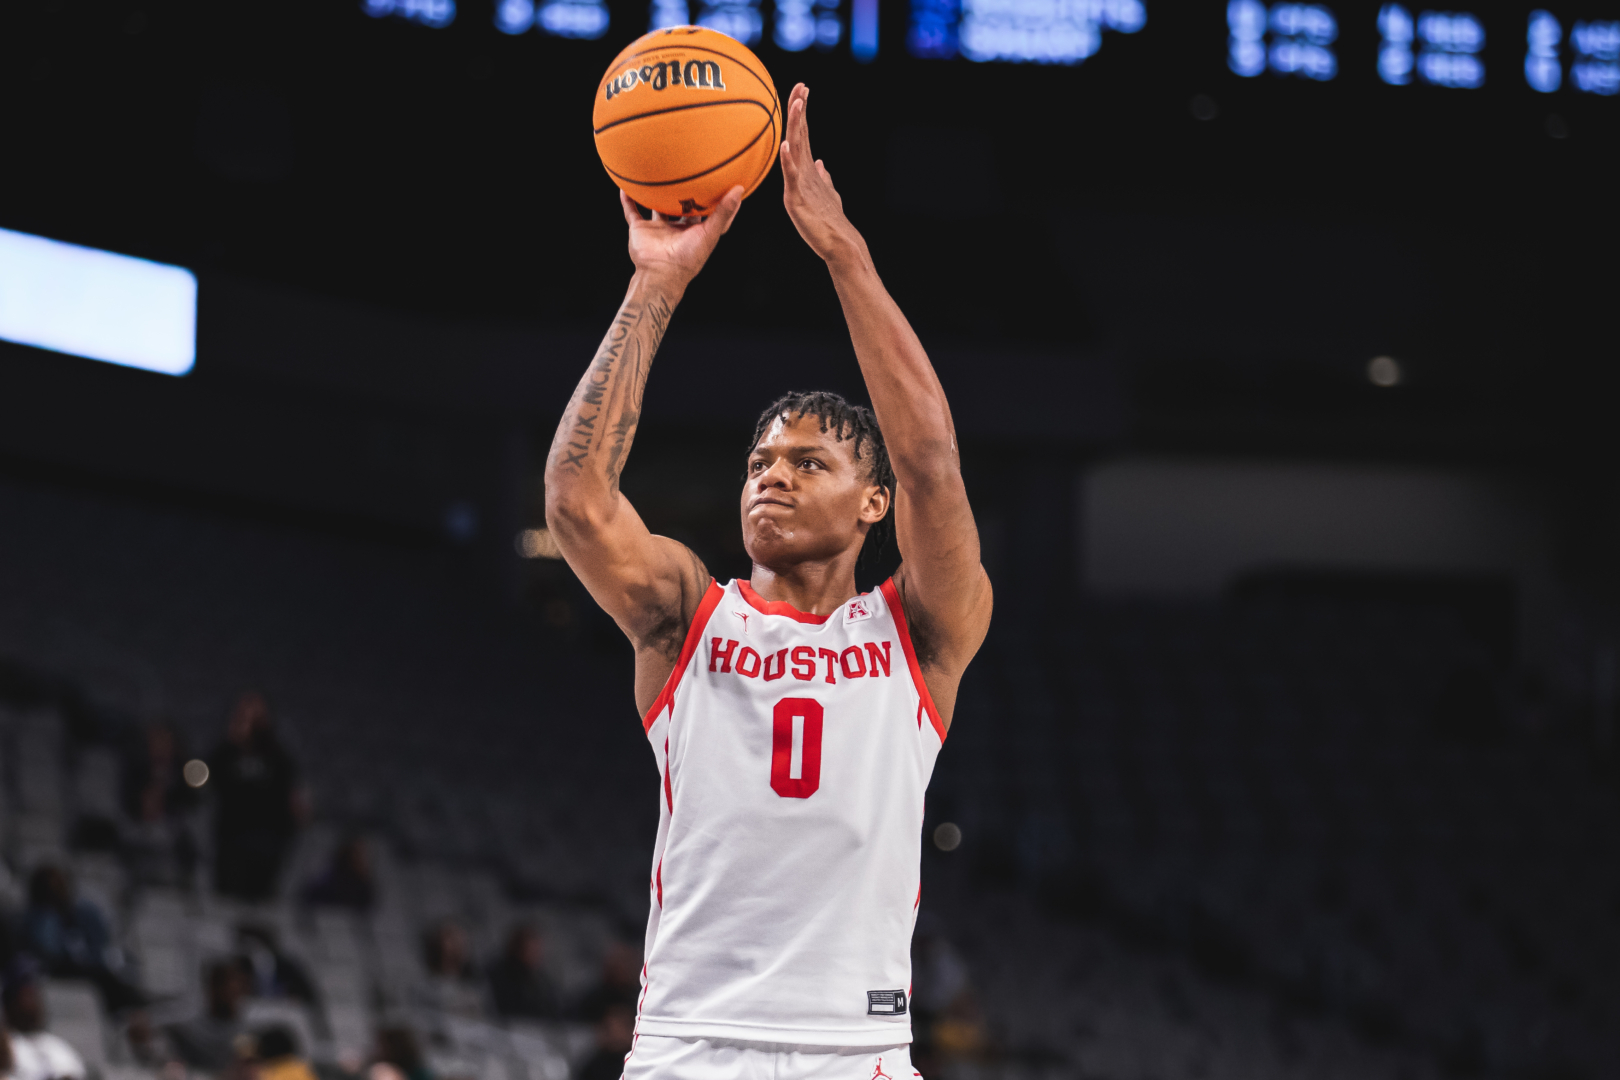 Marcus Sasser became the first UH player to be named a first-team All-American by the Associated Press since Hakeem Olajuwon earned the same honor in 1984. | Sean Thomas/Contributor